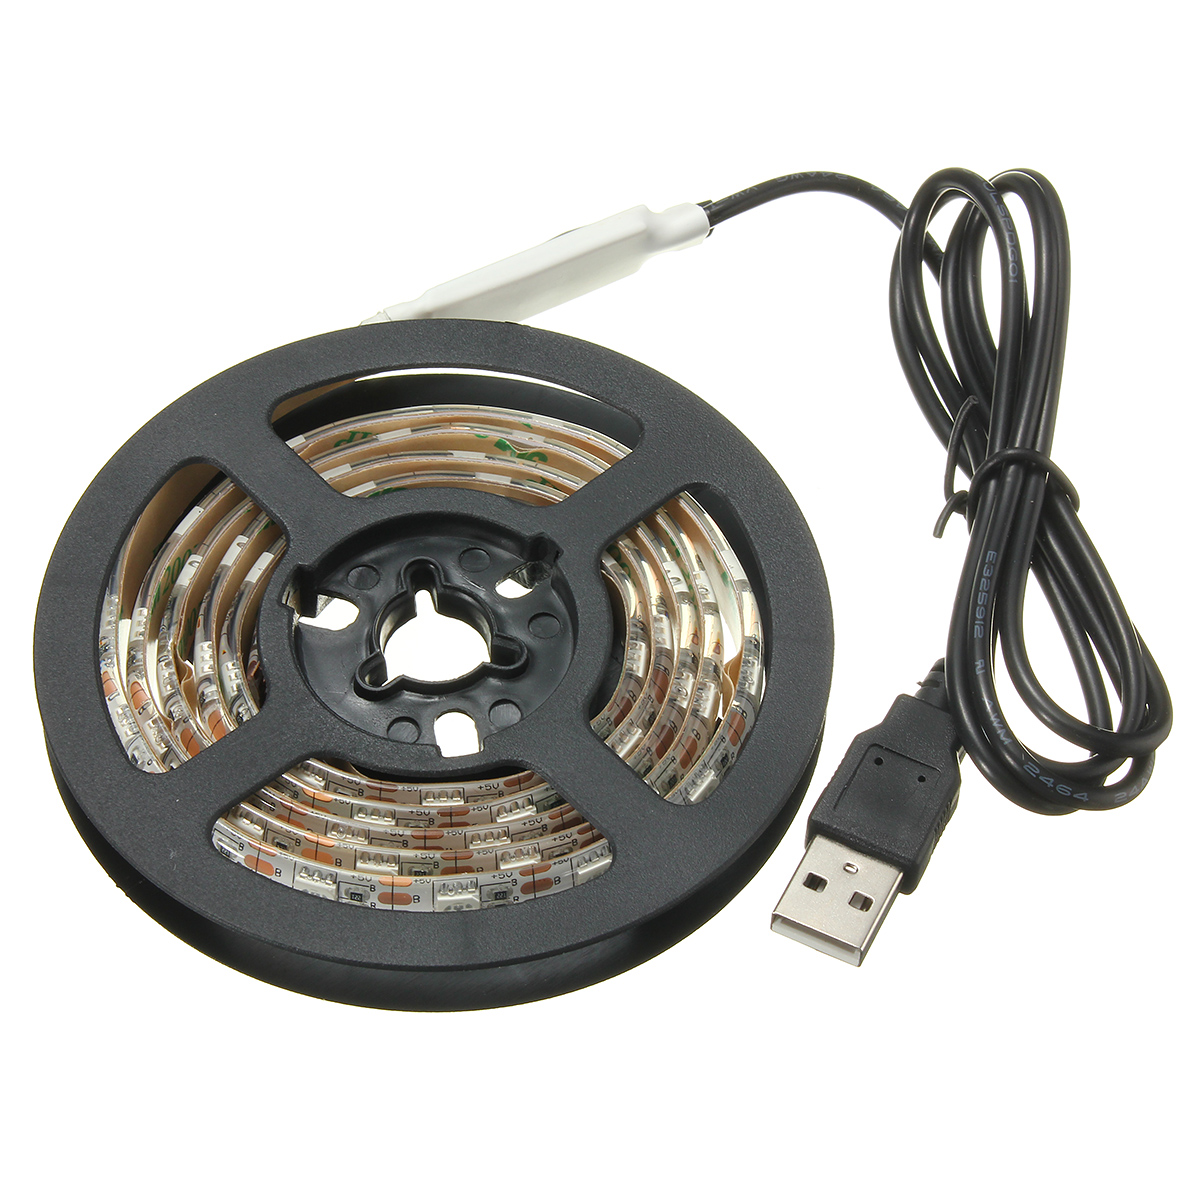 Find Waterproof USB DC5V SMD5050 Tape TV Background RGB LED Strip Light with Remote Controller for Sale on Gipsybee.com with cryptocurrencies